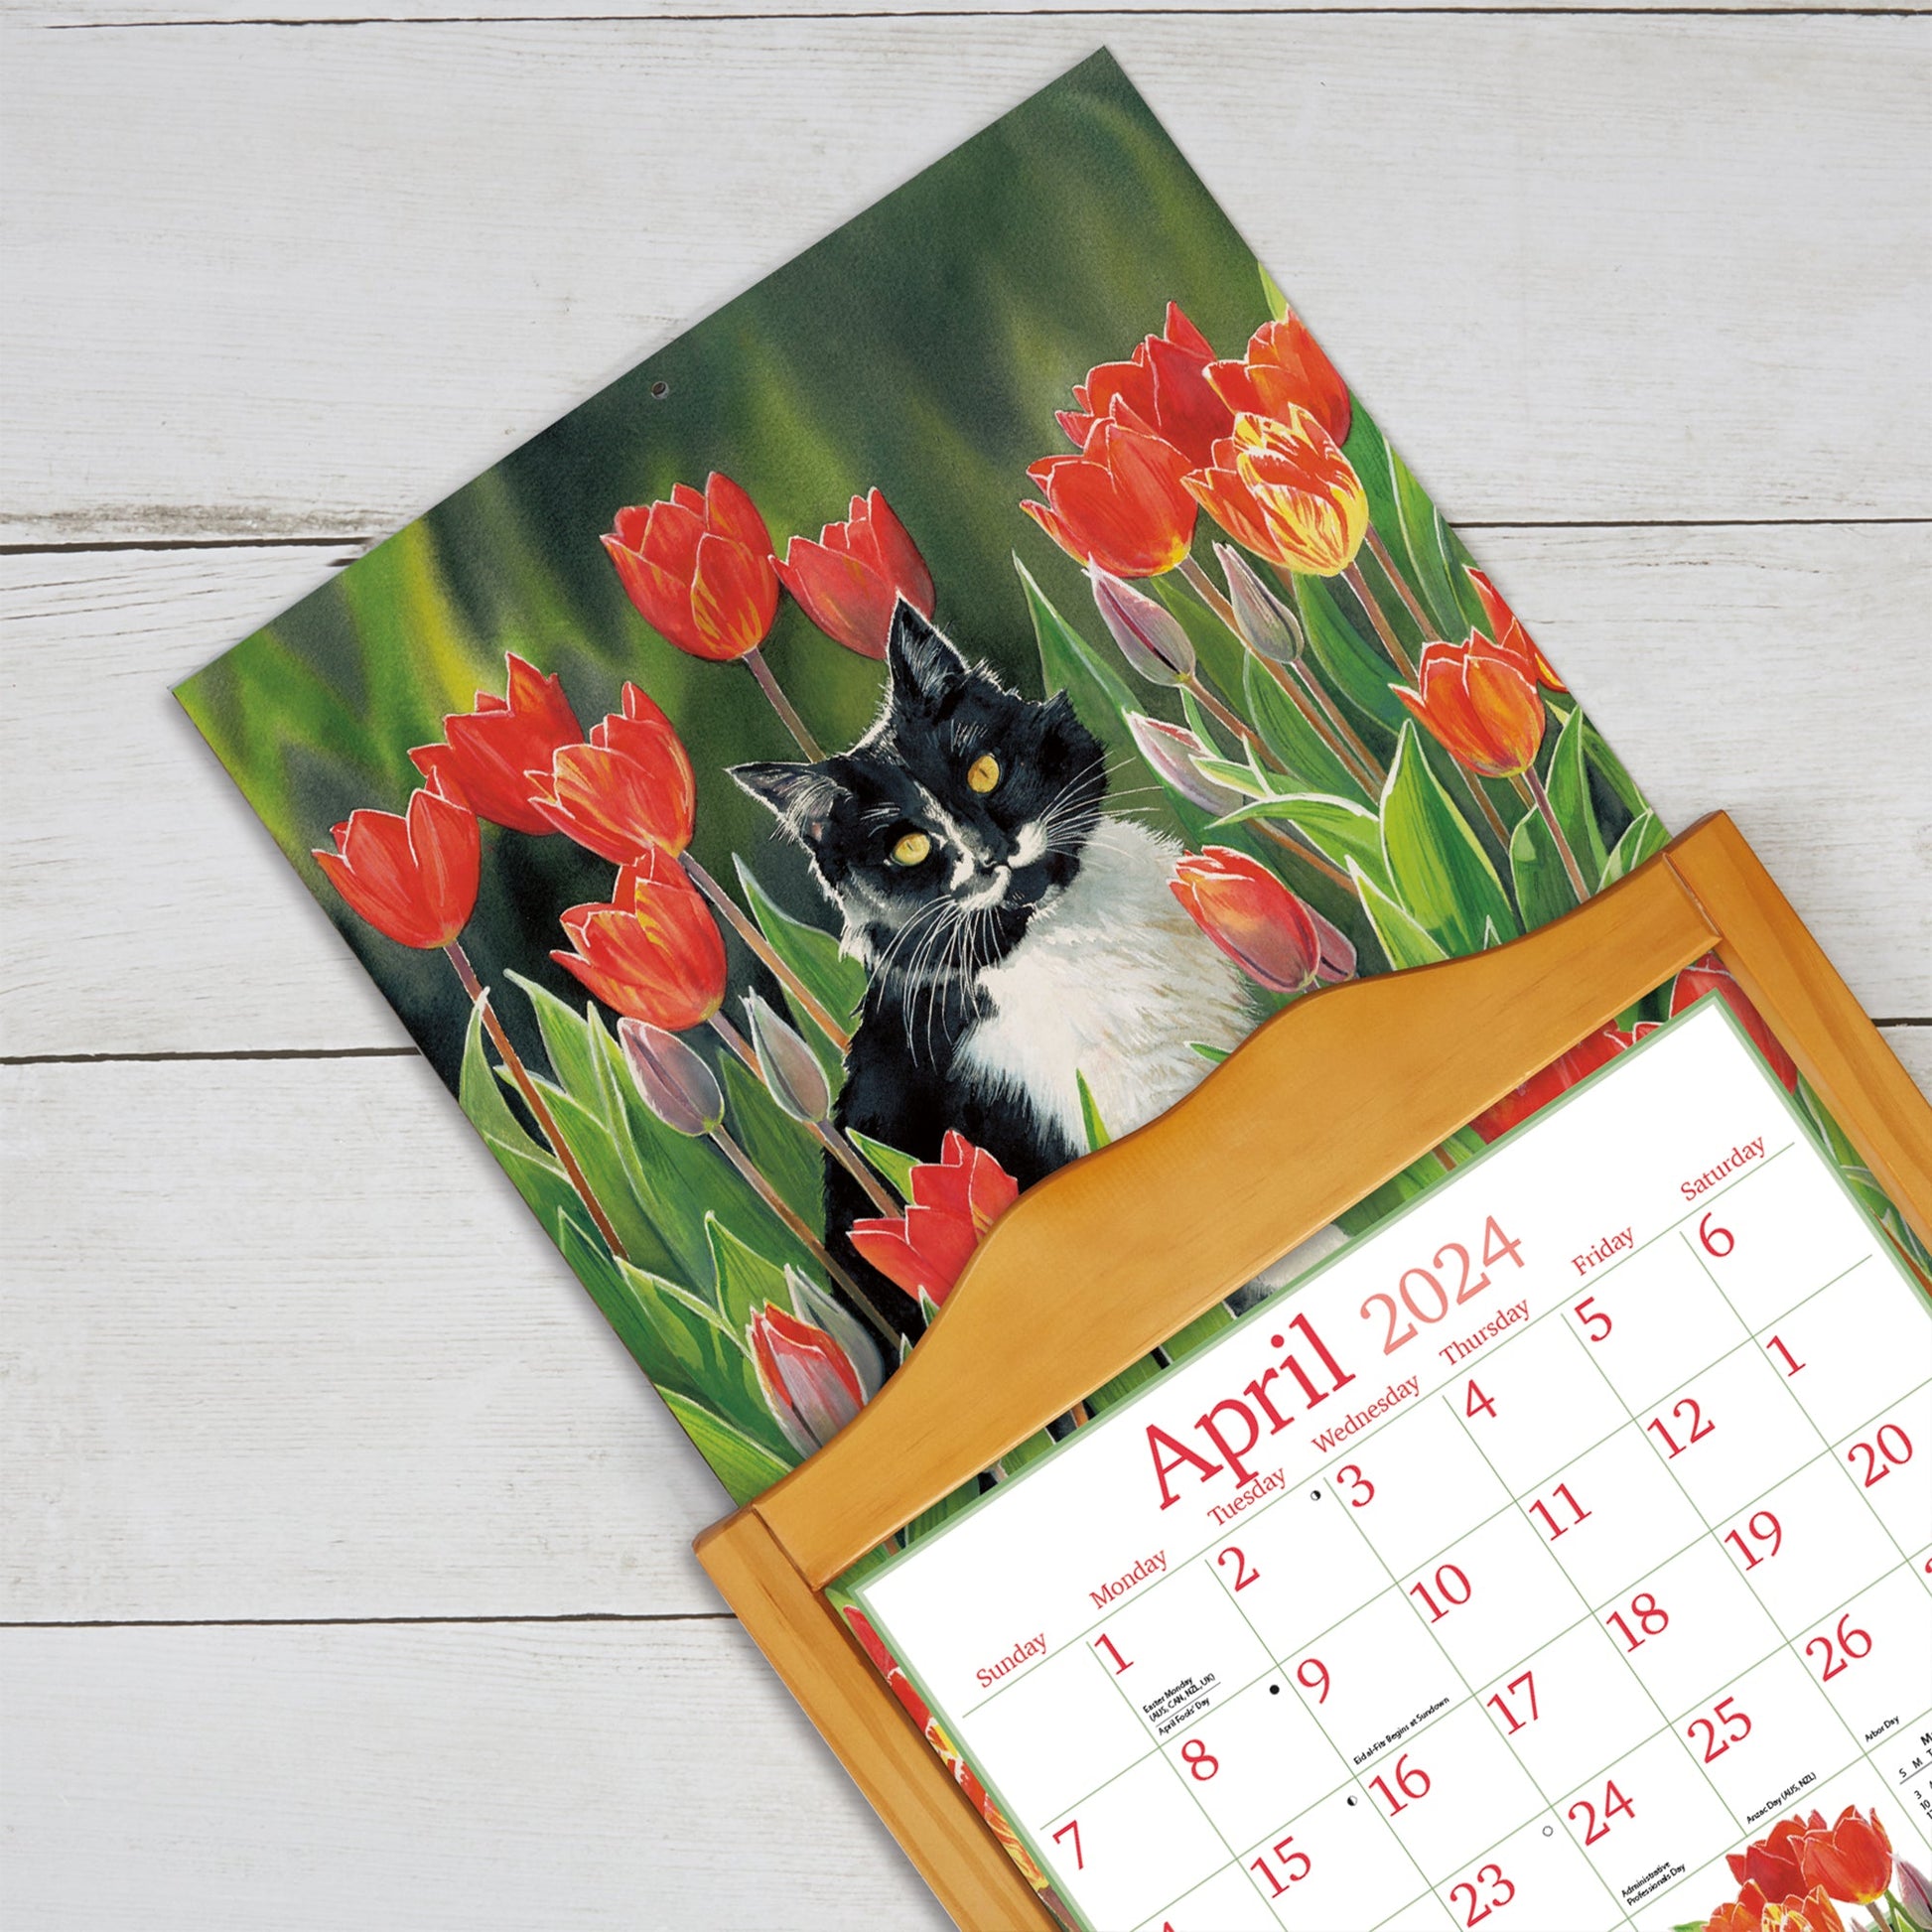 2024 Cats in the Country - Calendar – Wild Wings